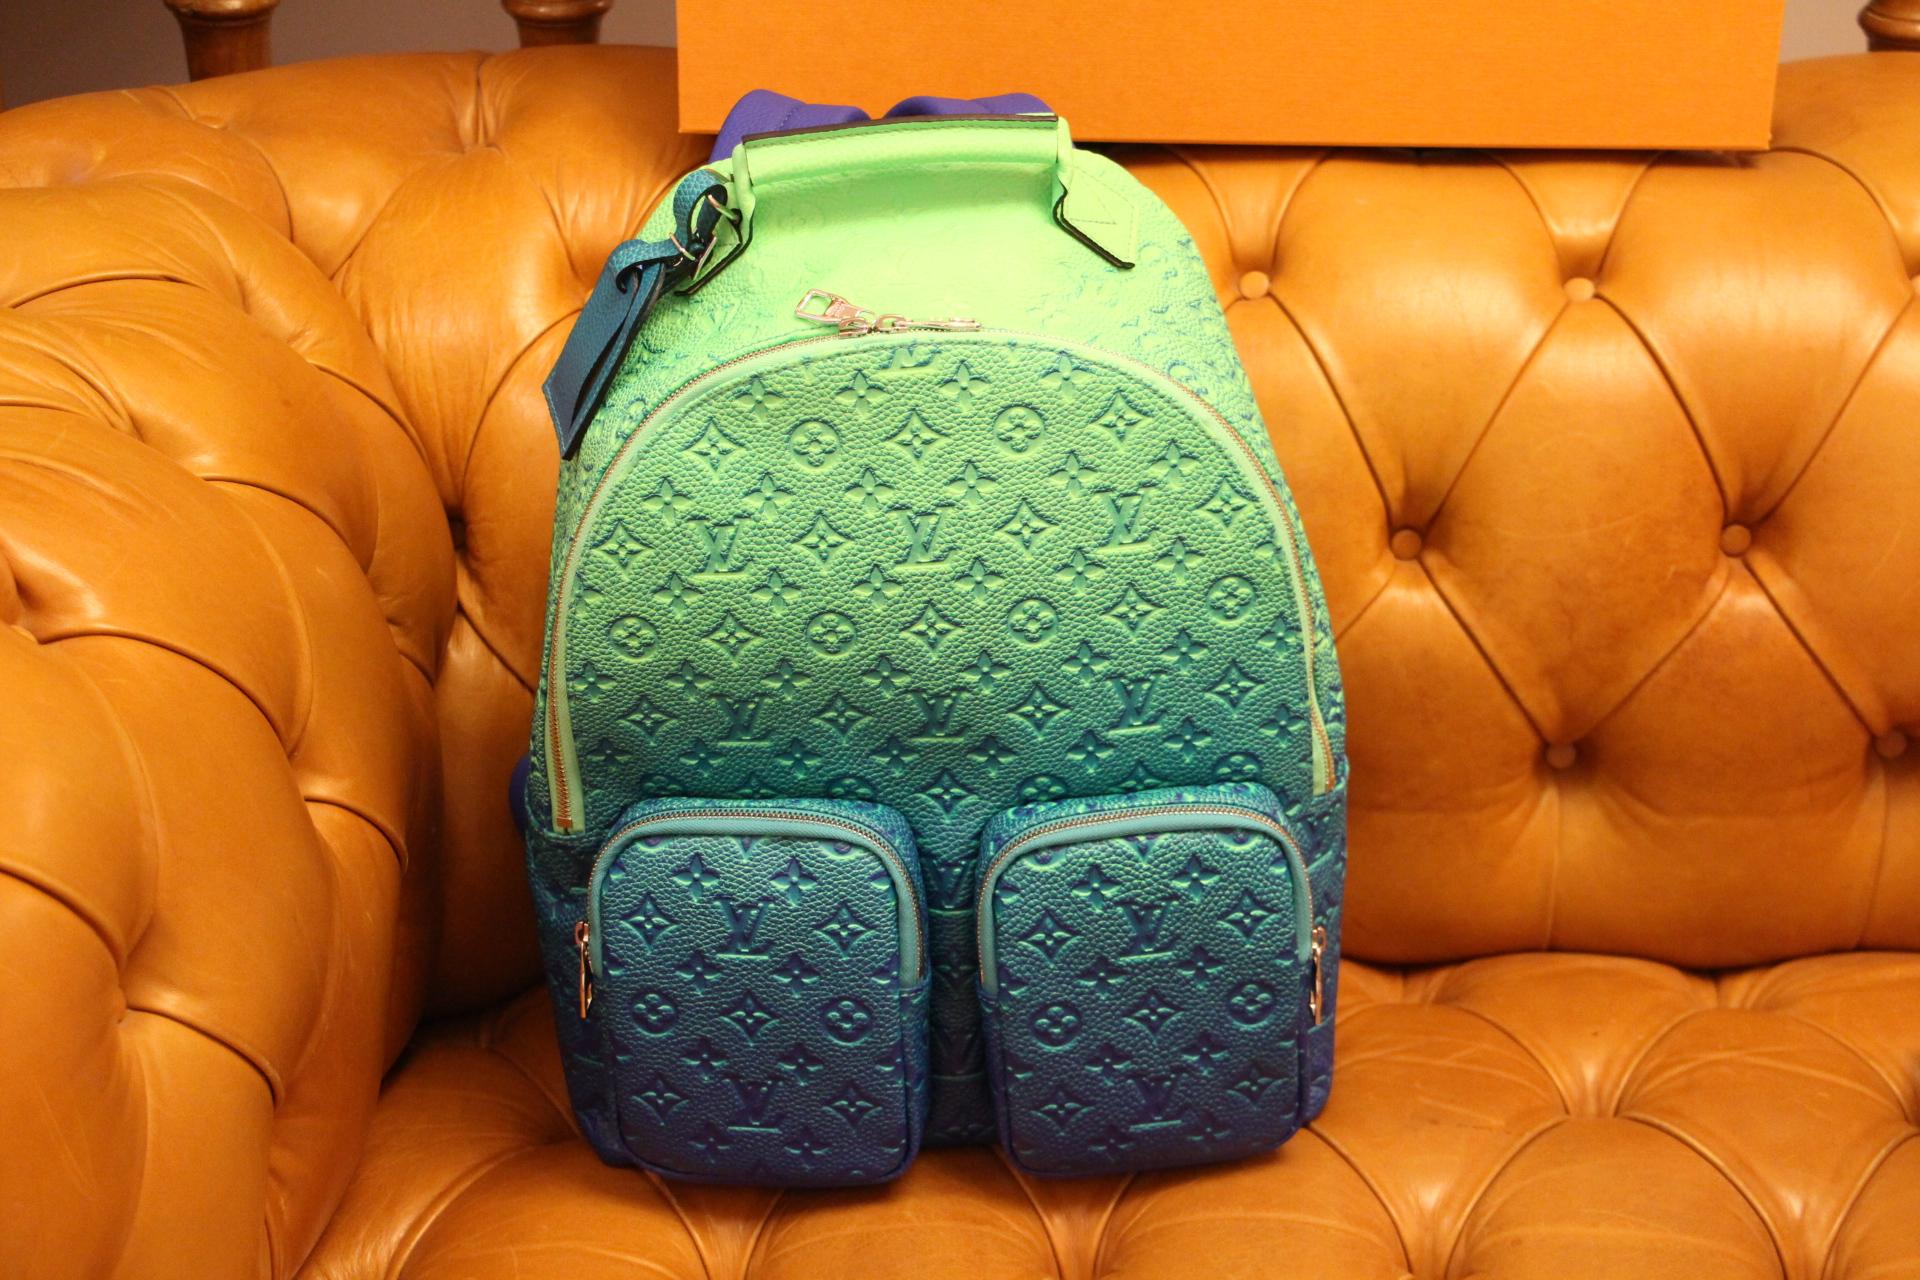 This extraordinary Louis Vuitton Multipocket Backpack has got very unique color gradient in fluorescent finish. When you look at it, you've got a feeling of an optical illusion with very changing and vivid colors. Made from Virgil Abloh’s new